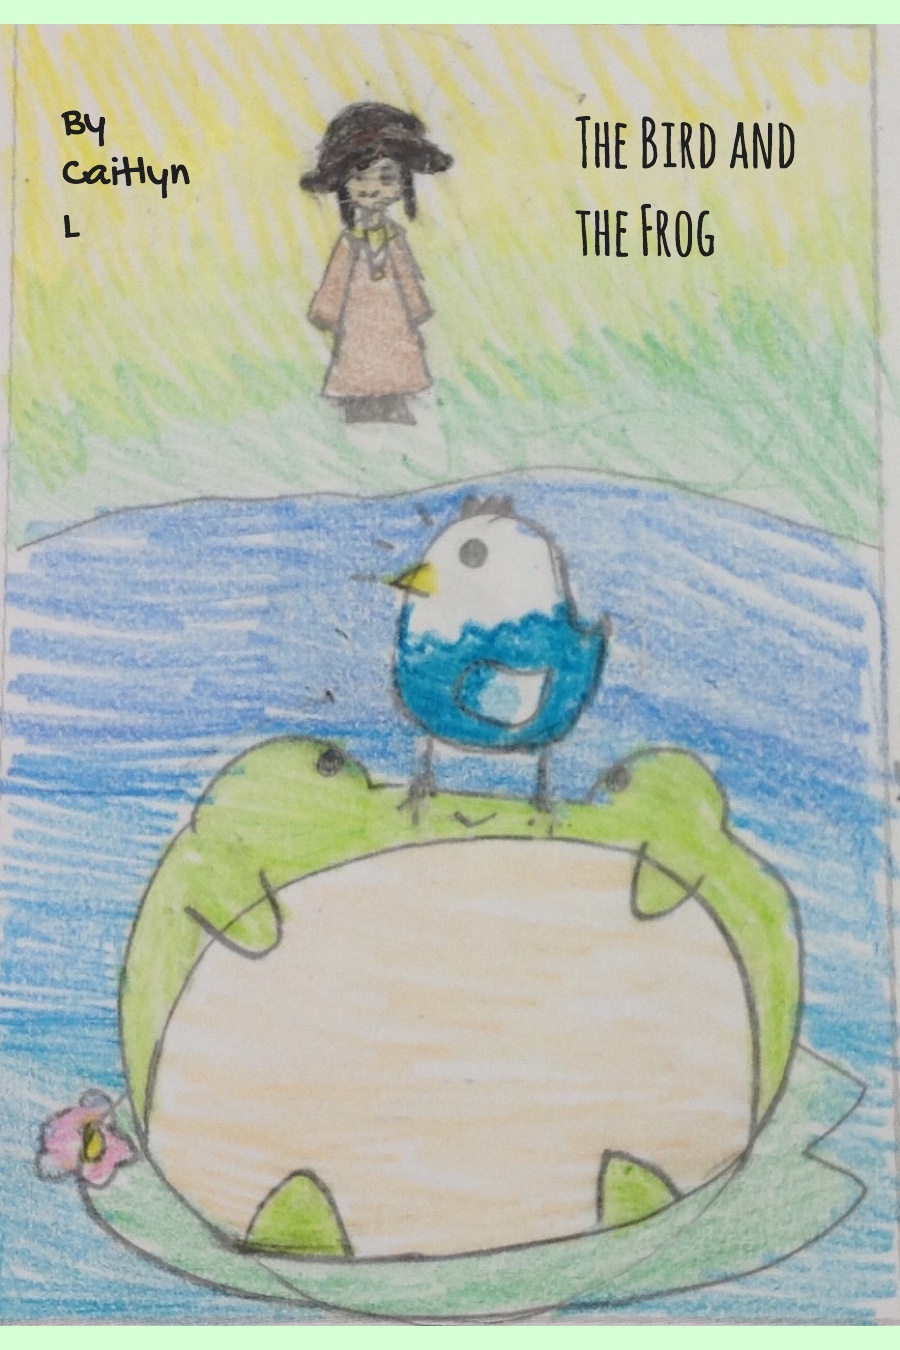 The Bird and the Frog by Caitlyn L